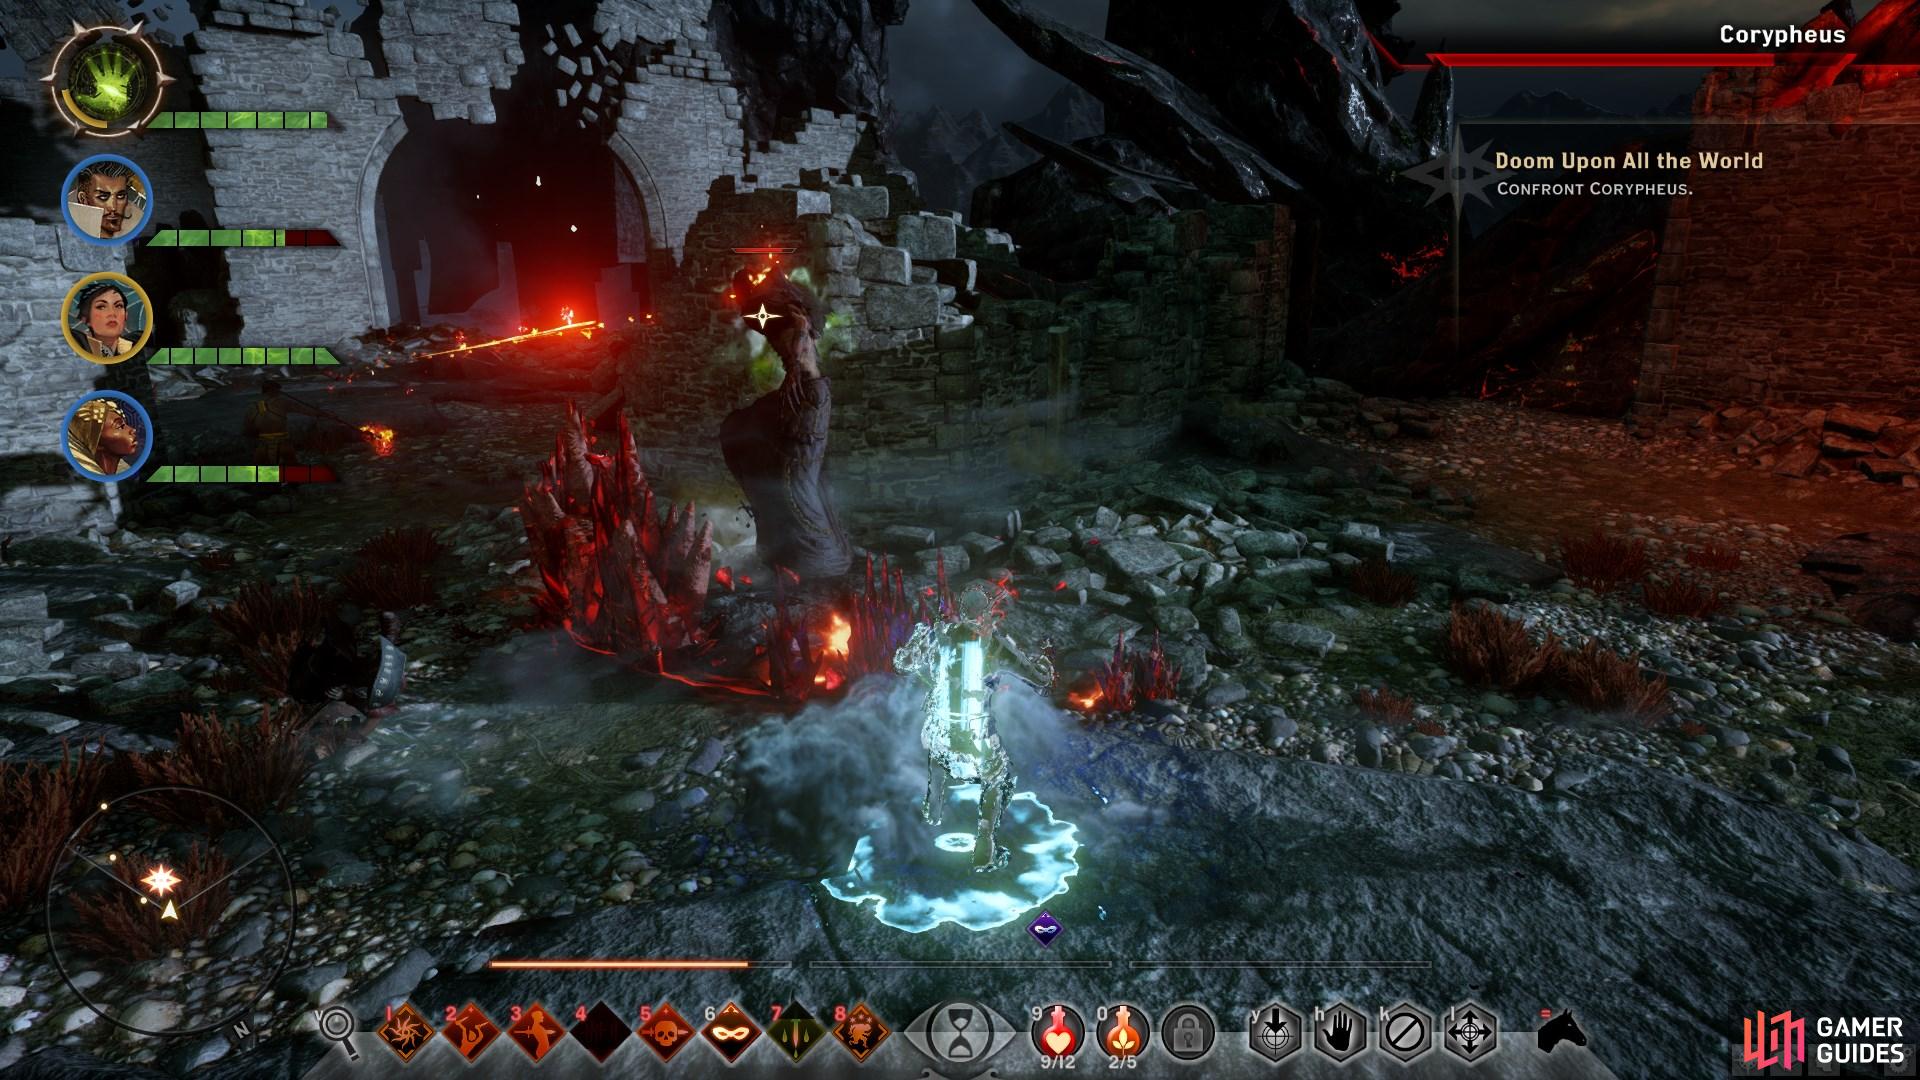 Avoid the walls of red lyrium as they spawn around you, which explode and inflict high damage.